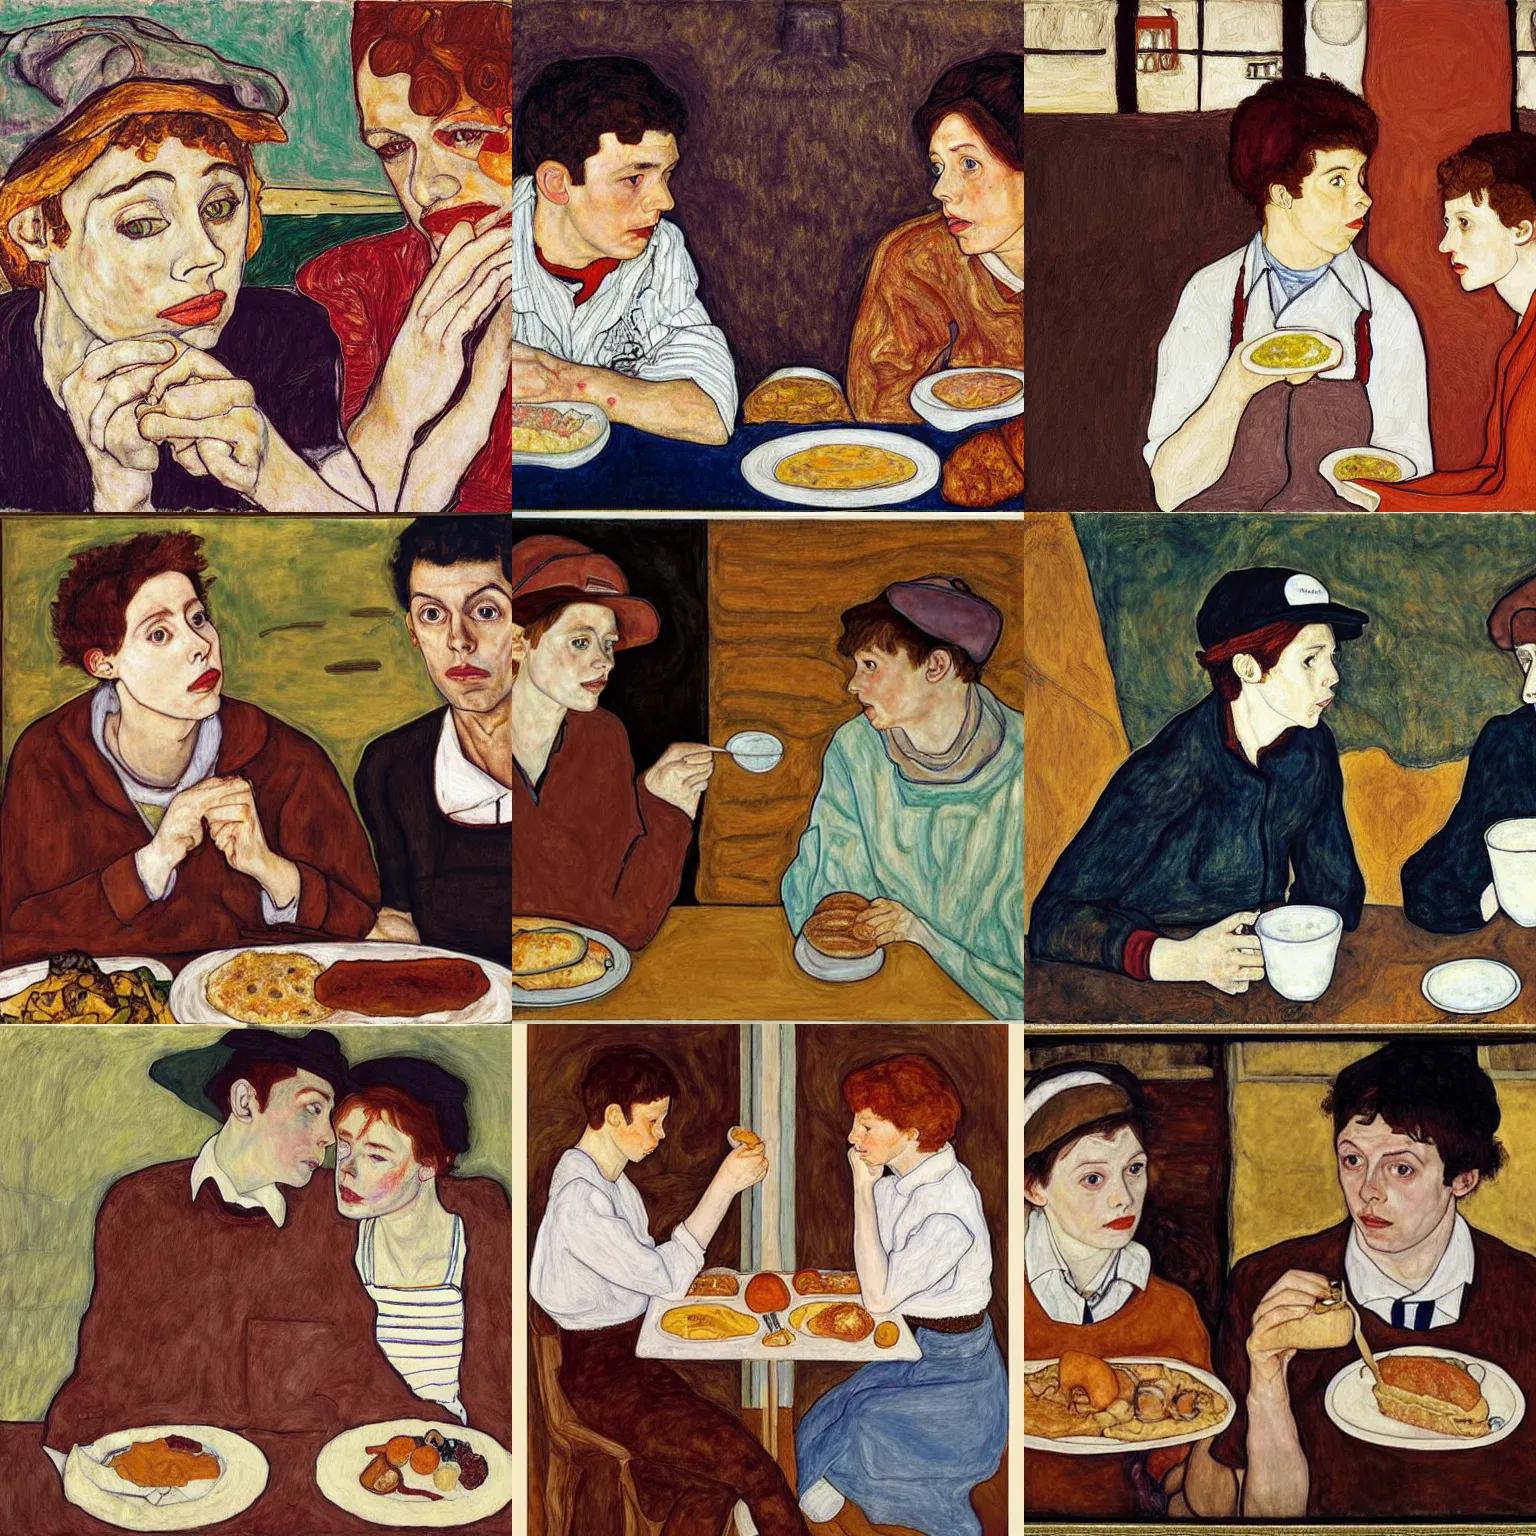 Prompt: a painting of two people eating breakfast, one is female asa Butterfield mixed with pam beesly, the other is a man with brown hair wearing a baseball cap, the man is wearing a baseball cap, by egon schiele